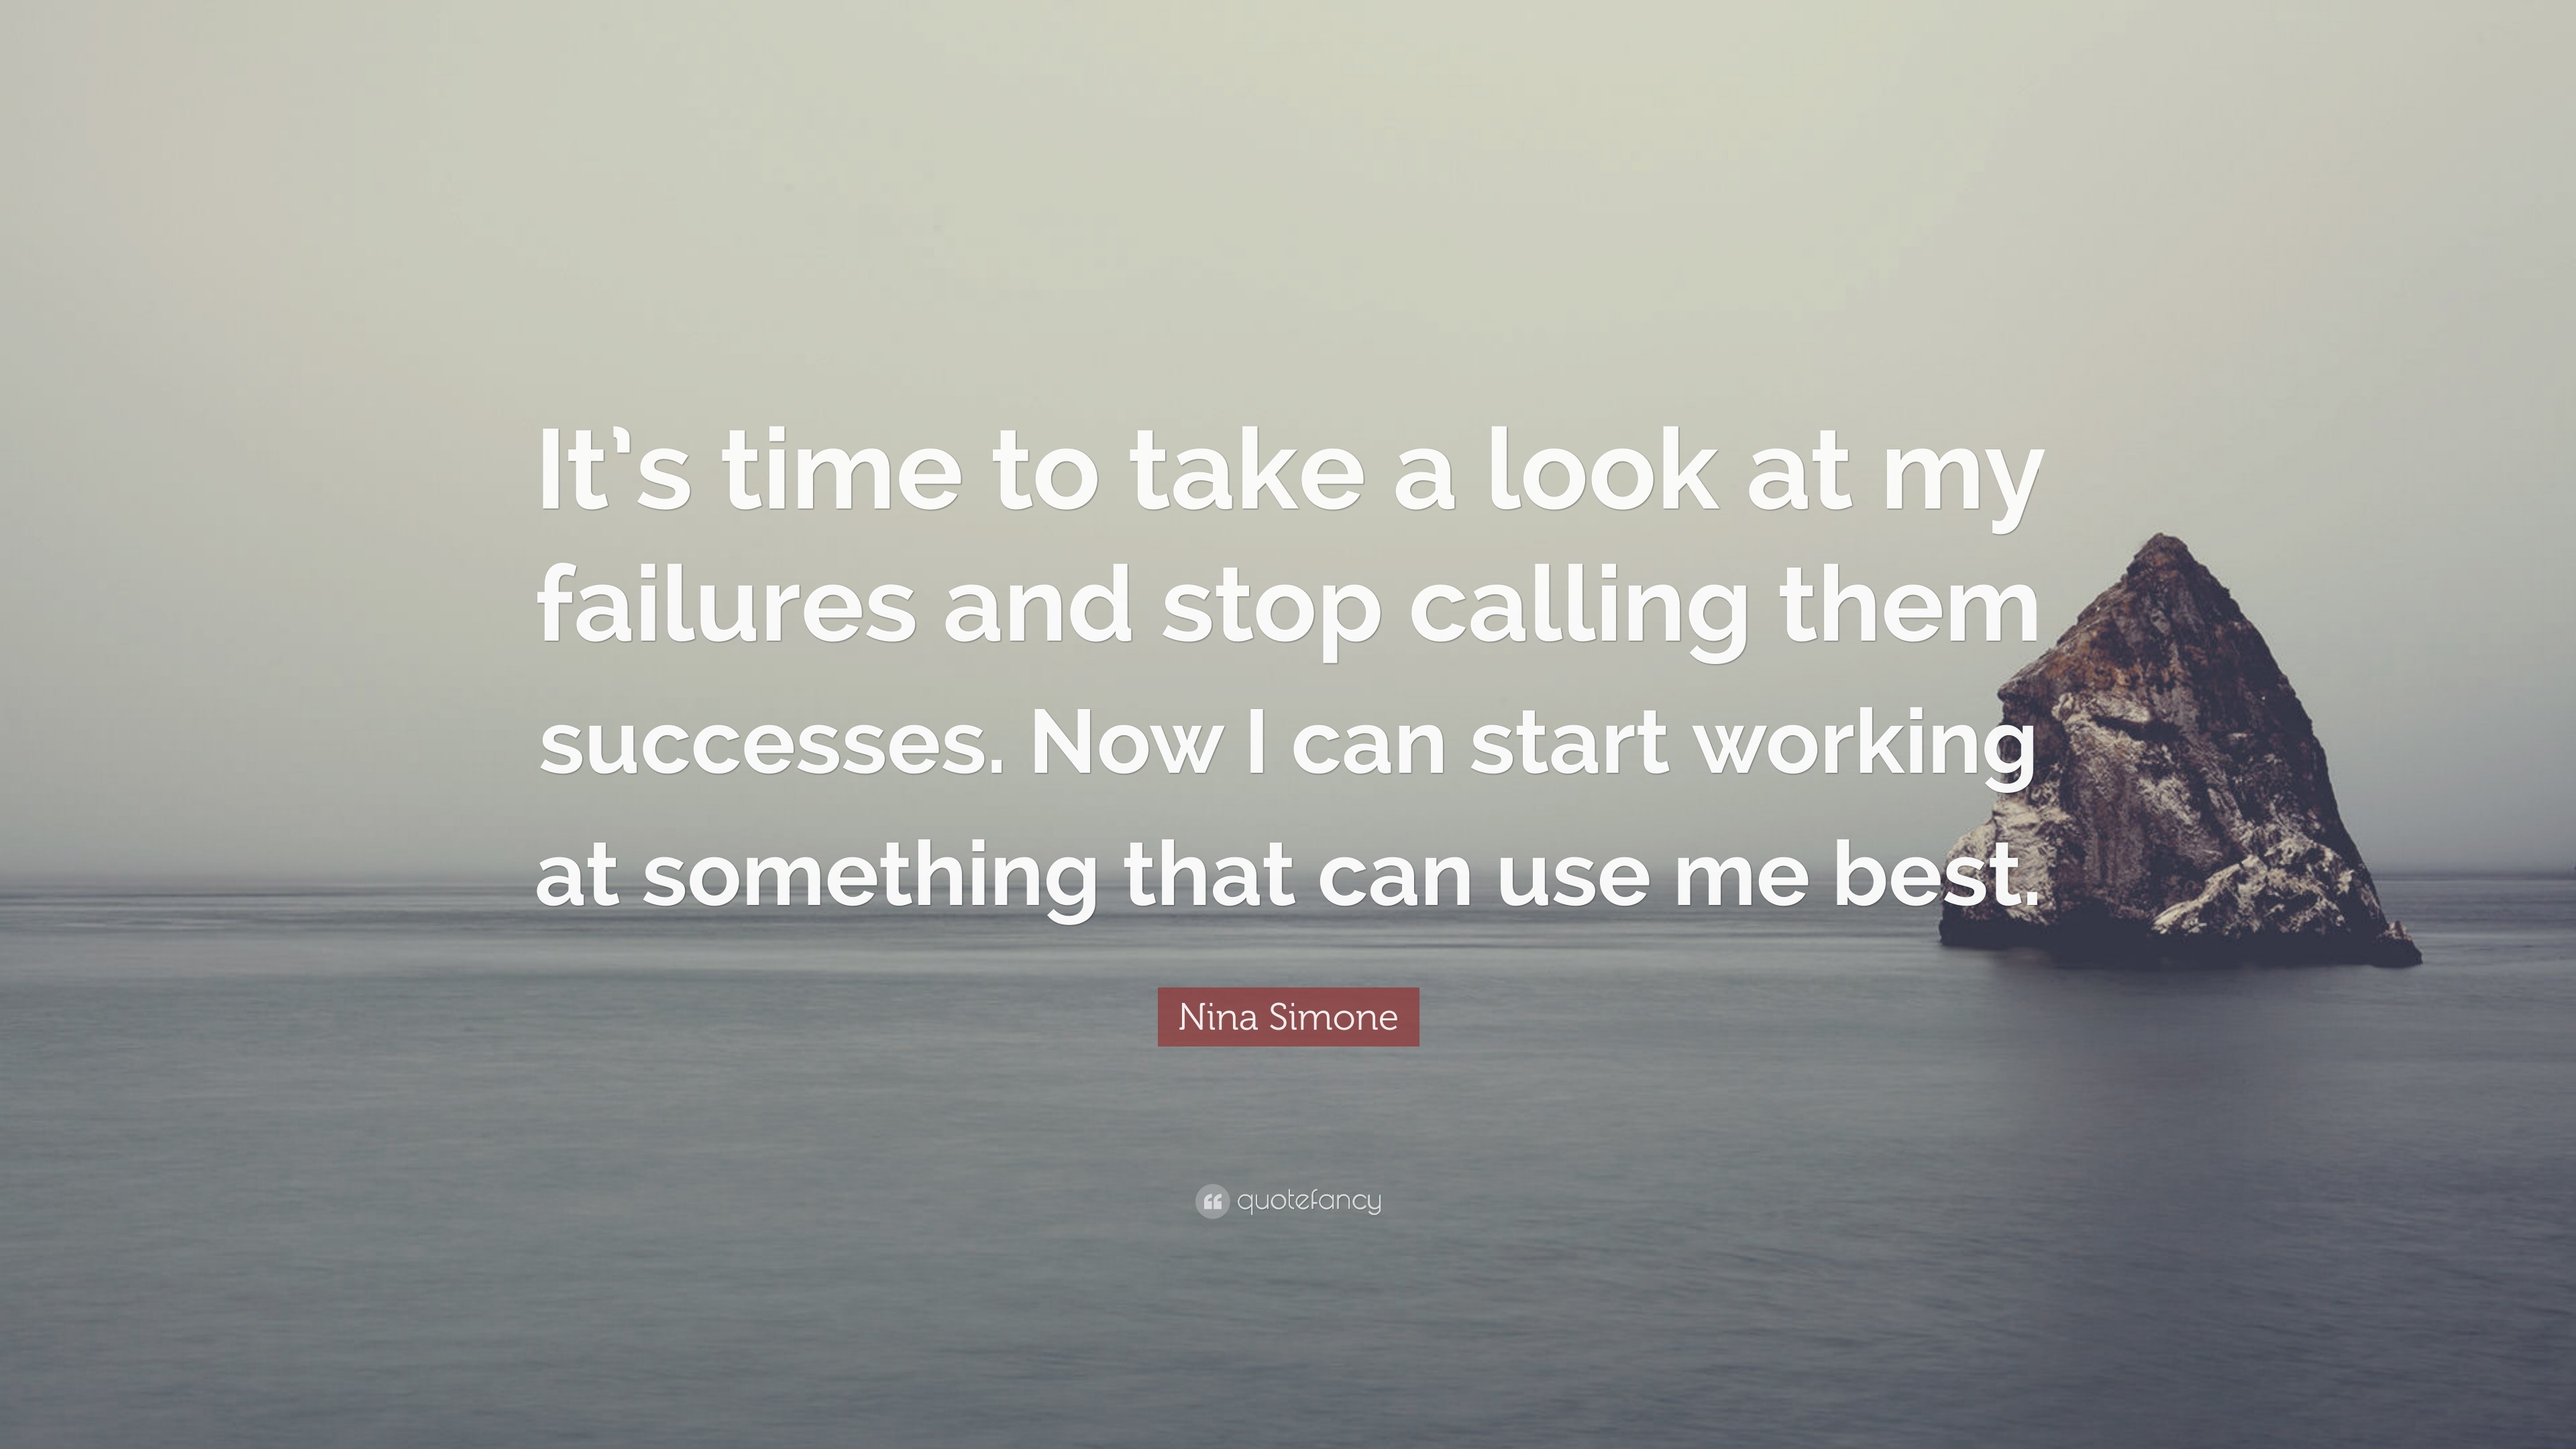 Nina Simone Quote: “It’s time to take a look at my failures and stop ...